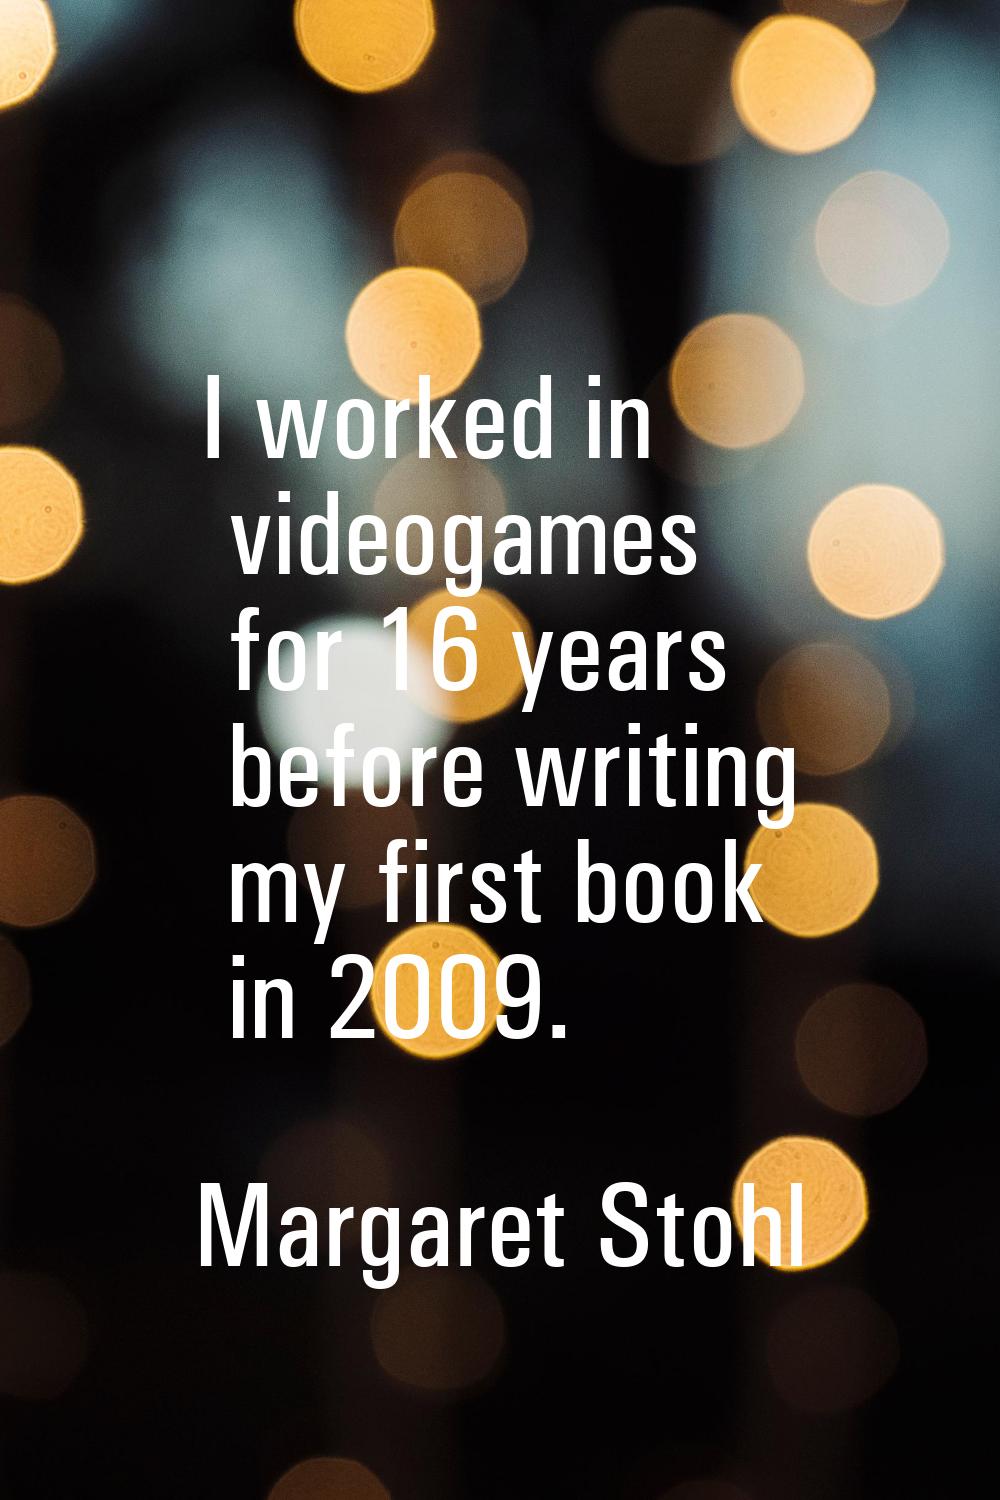 I worked in videogames for 16 years before writing my first book in 2009.